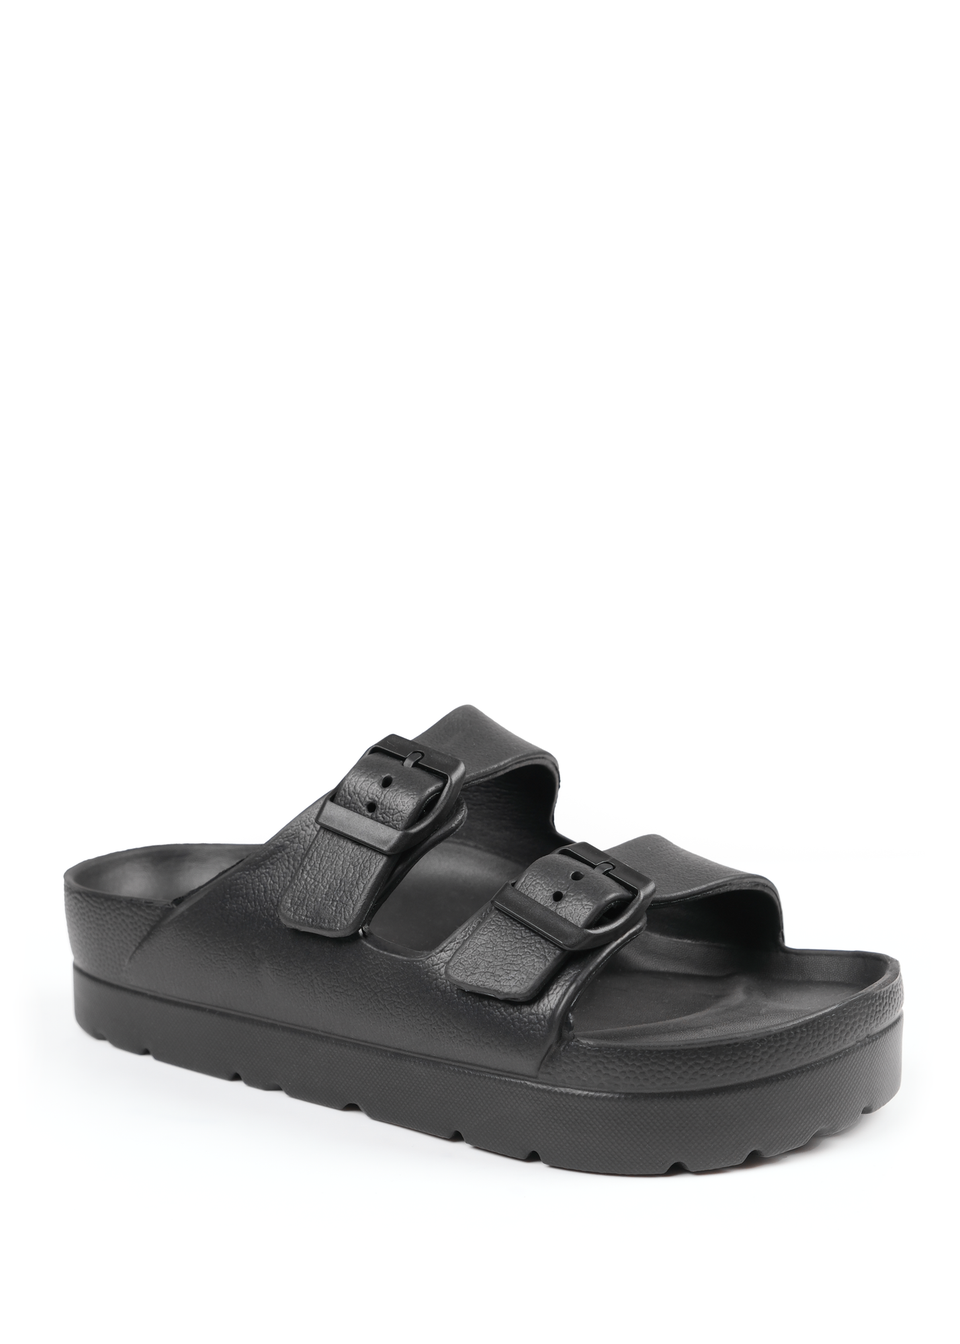 Where's That From White Danielle Slider Sandals With Buckle